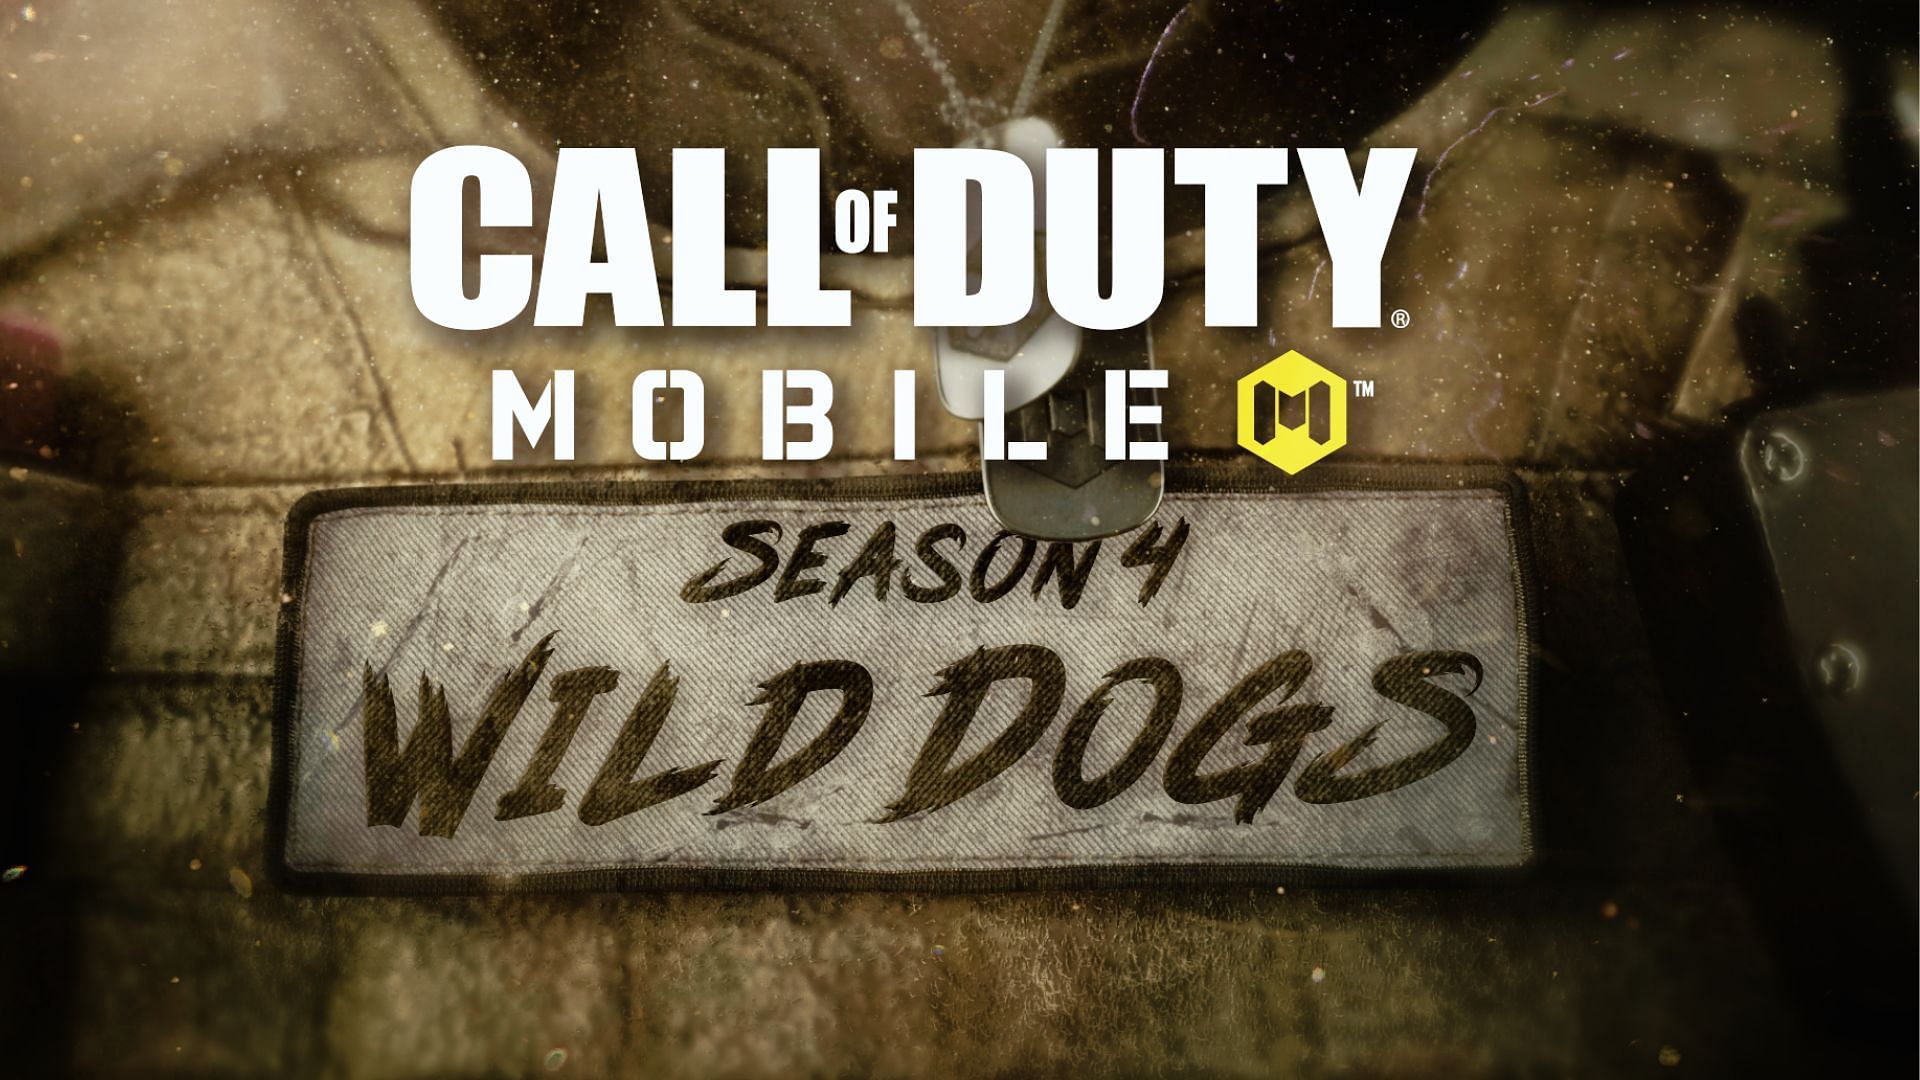 COD Mobile Season 4 will take players to the desert with tons of new content in multiplayer and major changes in Battle Royale modes (Image via Activision)